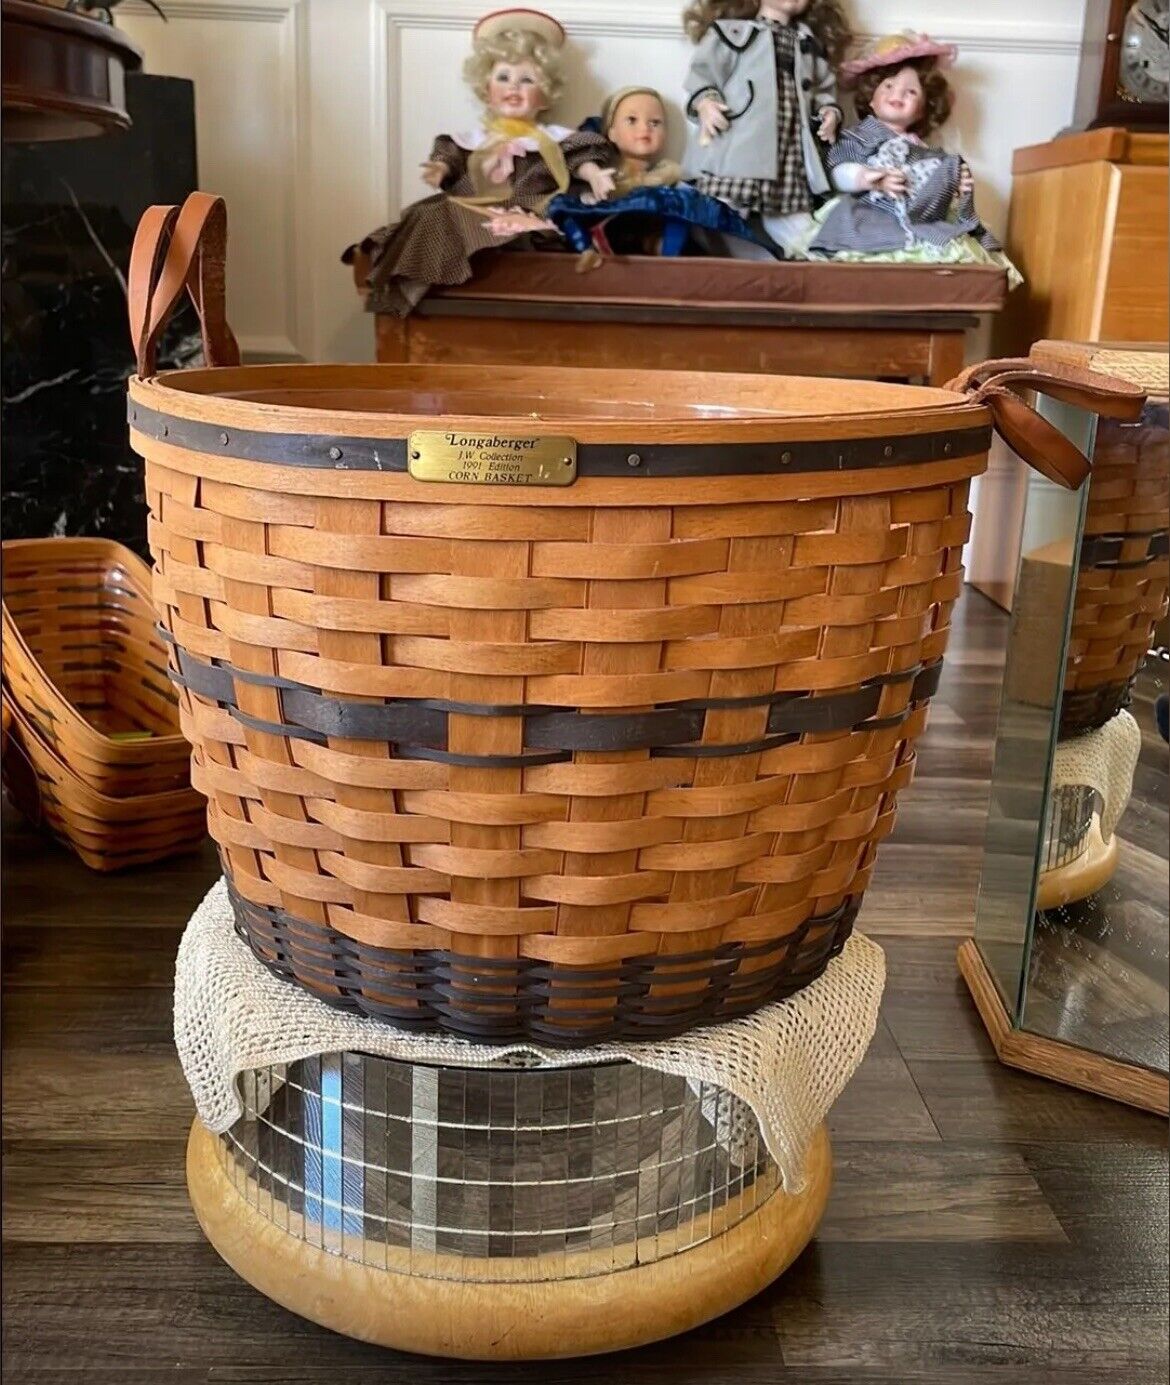 Longaberger Large 1991 J. W. Collection Corn Basket with Protector 17” Diameter